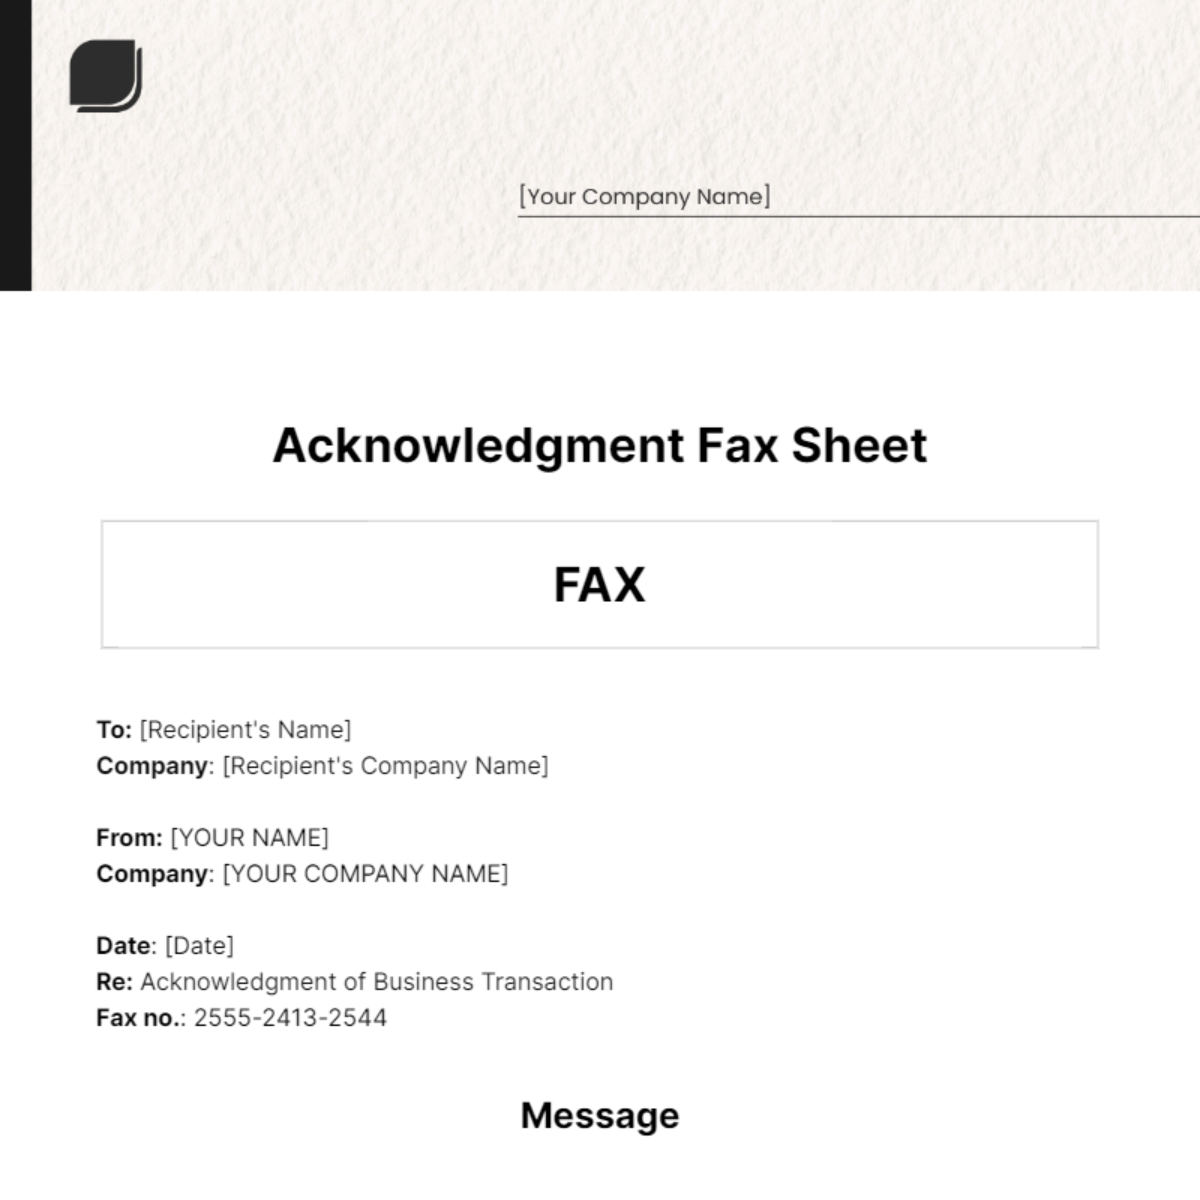 Free Acknowledgment Fax Sheet Template